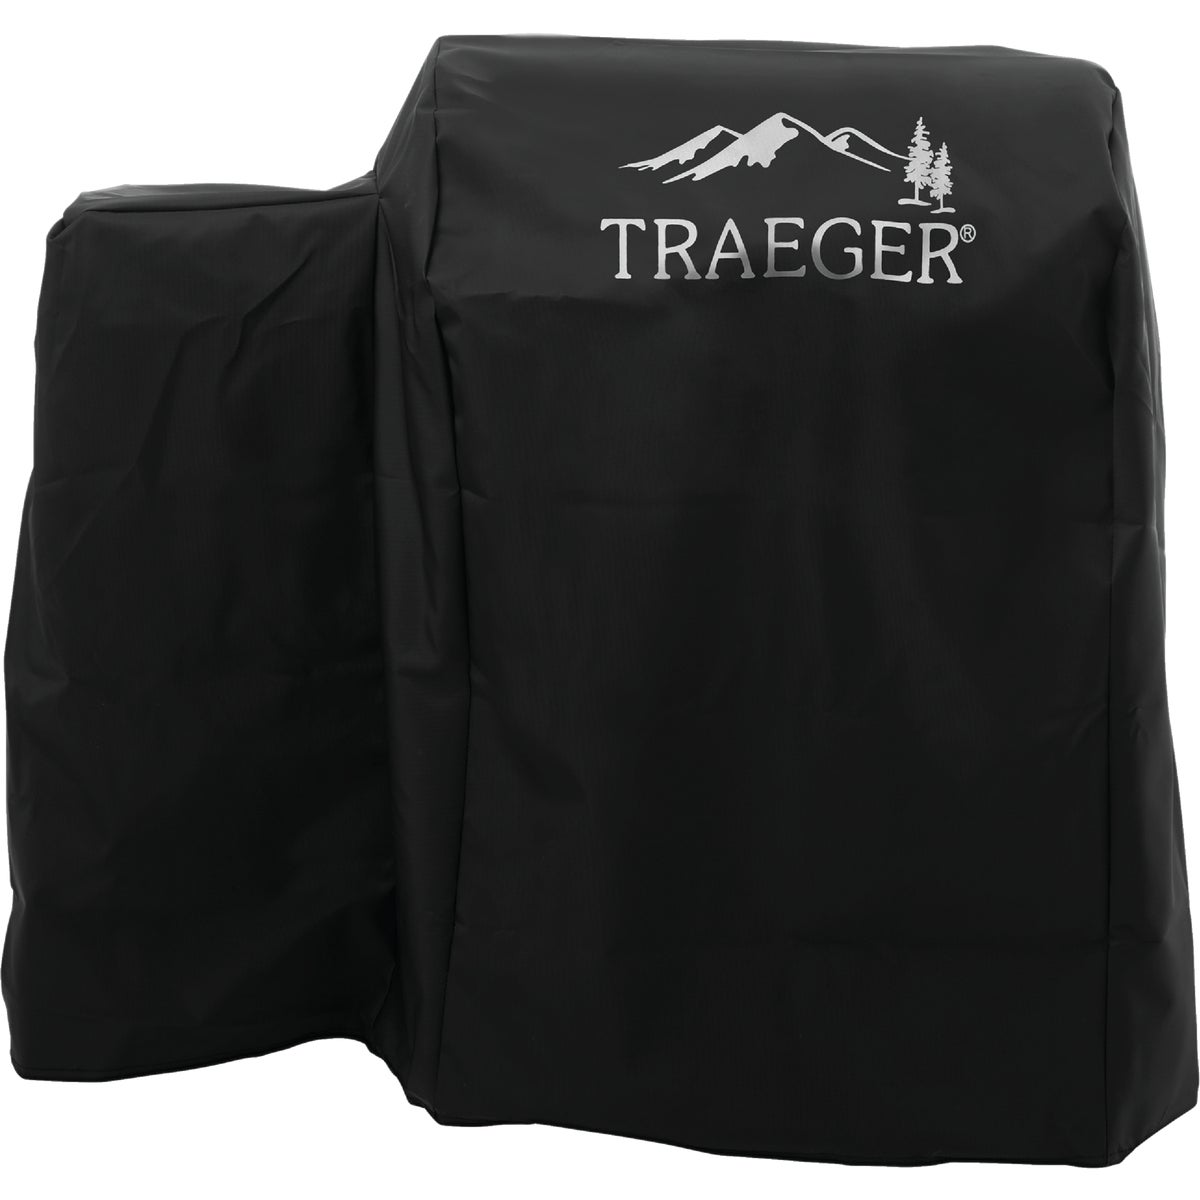 Item 801134, Full length, heavy duty, all weather material grill cover is made to last.